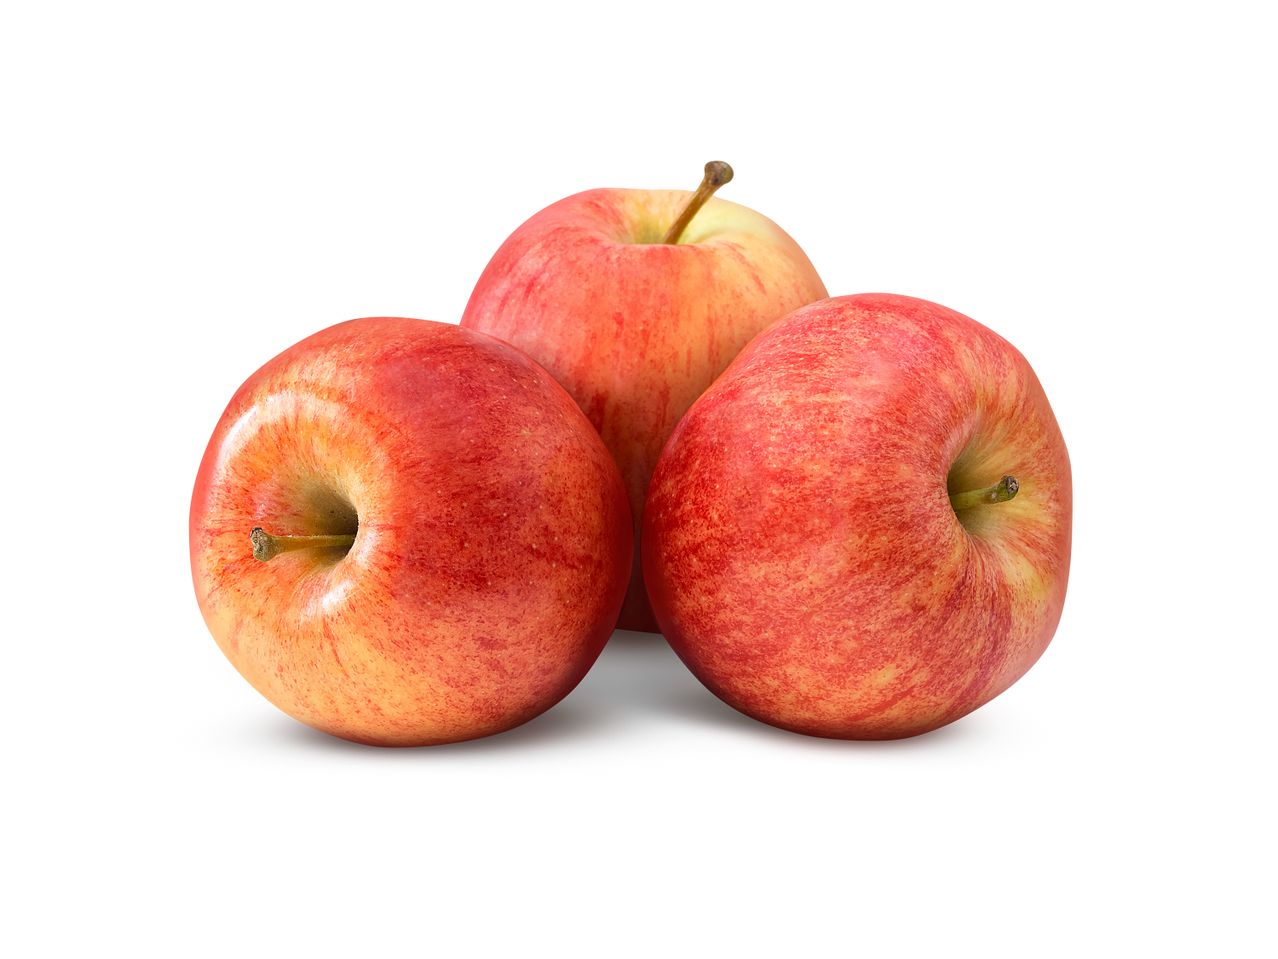 Go to full screen view: Gala Apples - Image 1